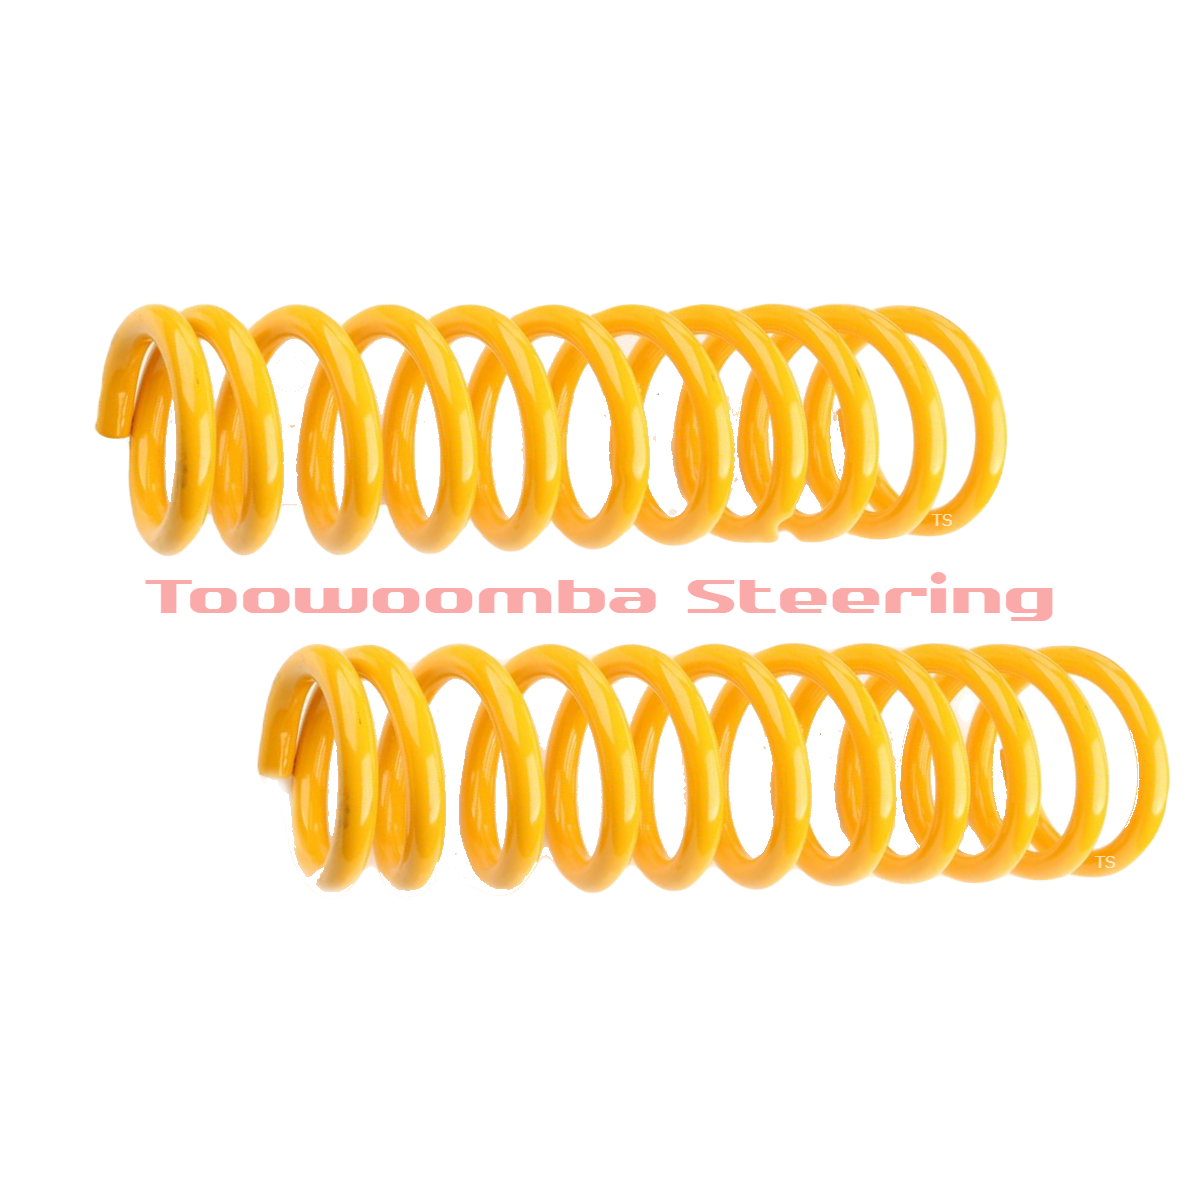 Rear Lowered King Springs - Ideal for - Lexus ES300 MCV20R 10/96 – 9/01, Lexus ES300 MCV30R 10/01-05, Lexus Es300 VCV10R 92 – 9/96 - (KTRL-61)